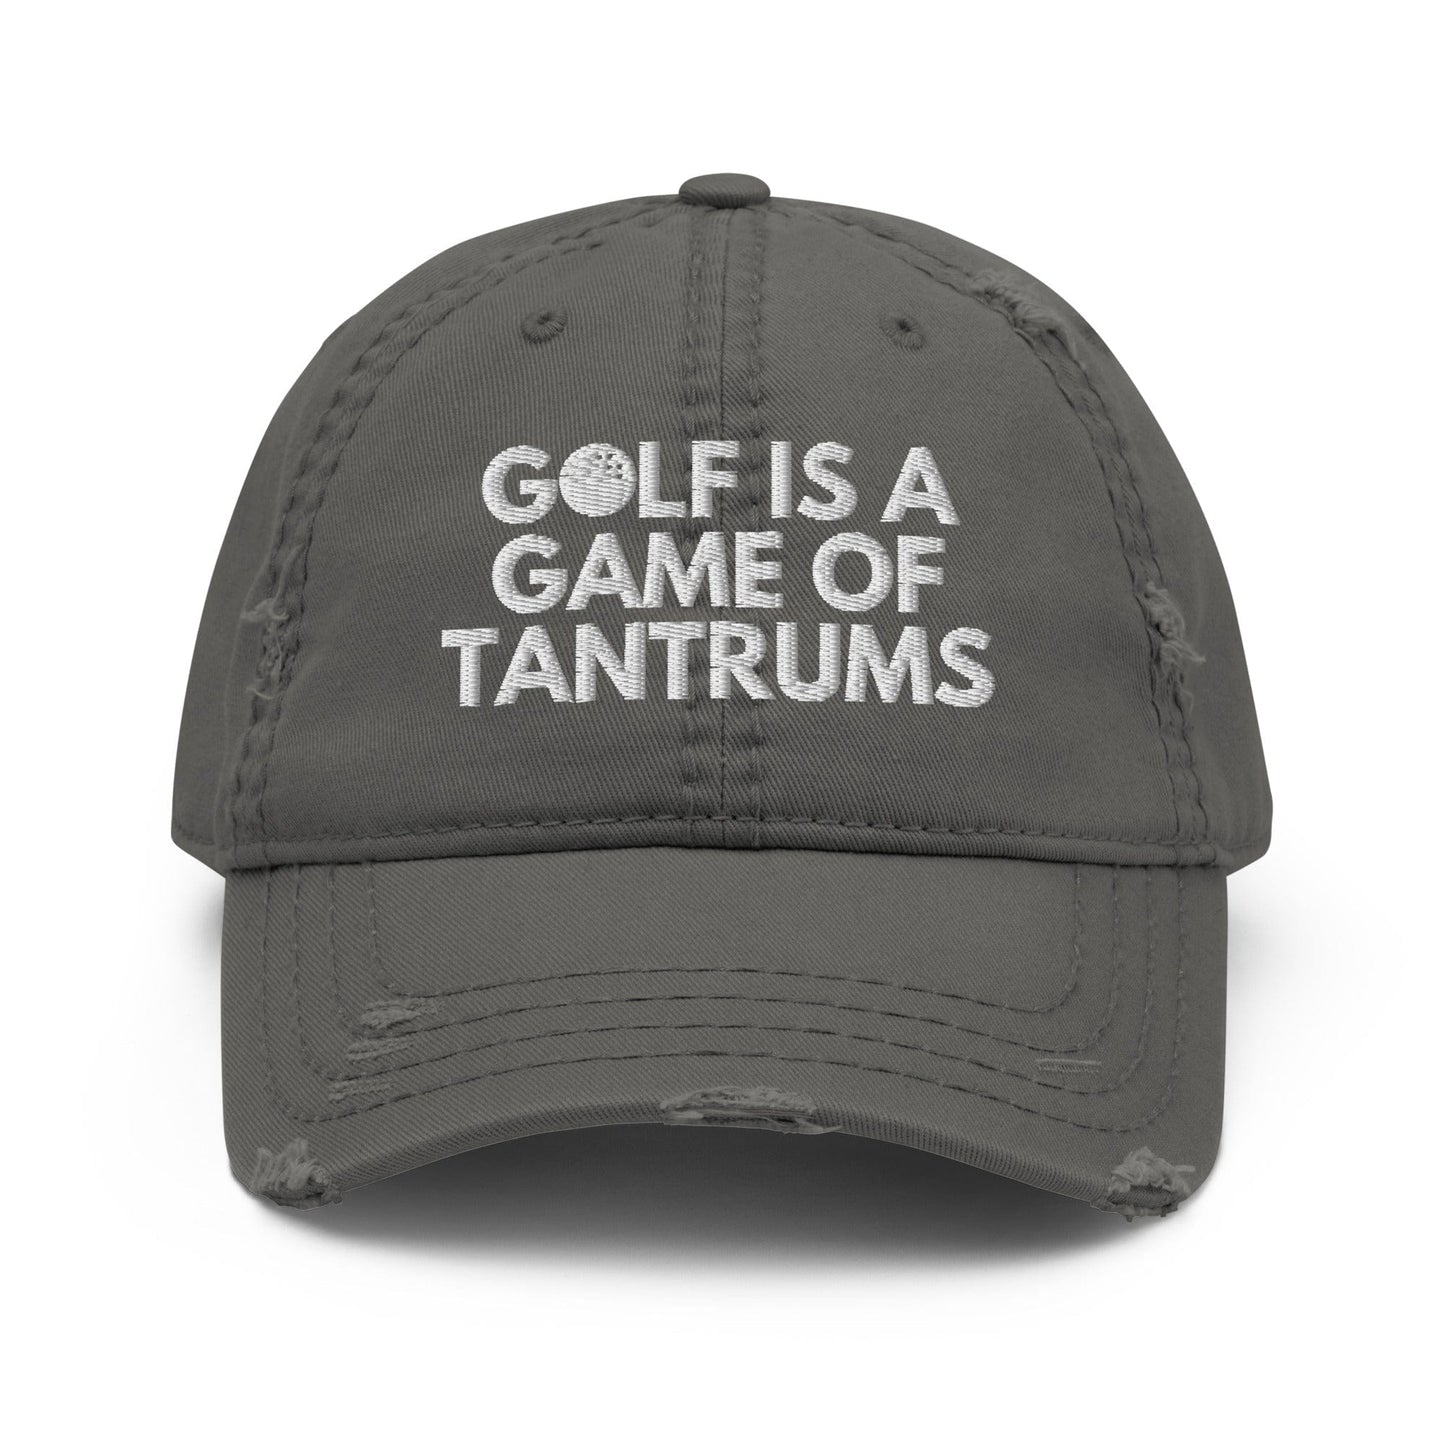 Funny Golfer Gifts  Distressed Cap Charcoal Grey Golf Is A Game Of Tantrums Hat Distressed Hat